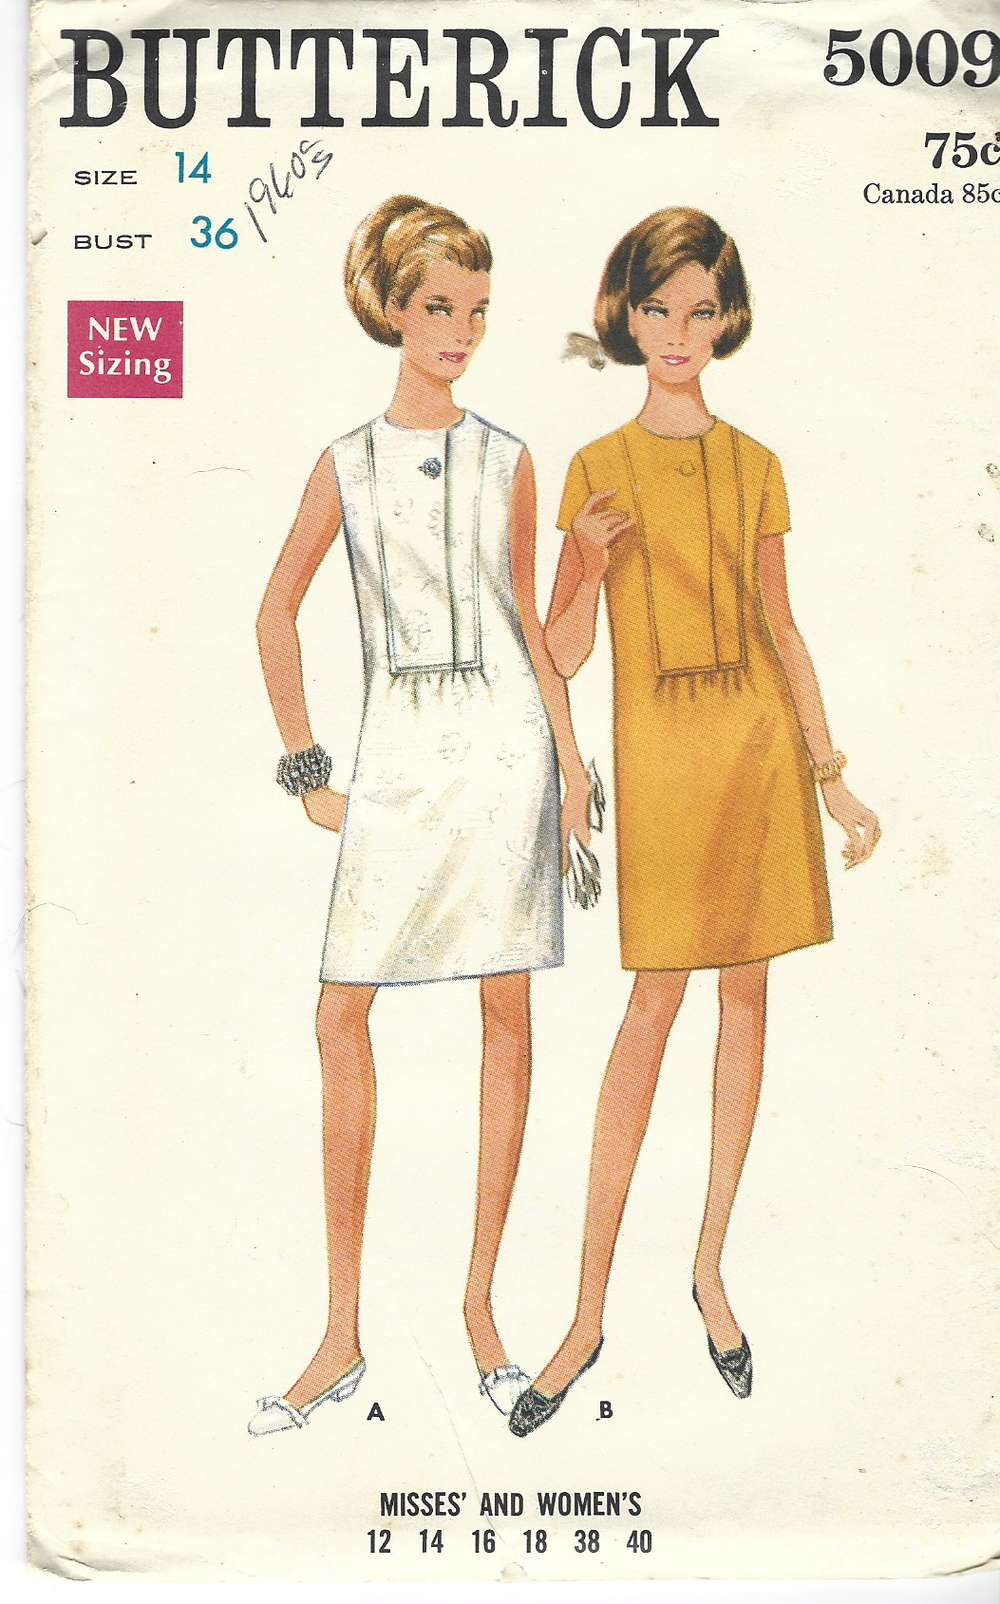 Butterick 5009 Ladies One Piece Dress Vintage Sewing Pattern 1960s